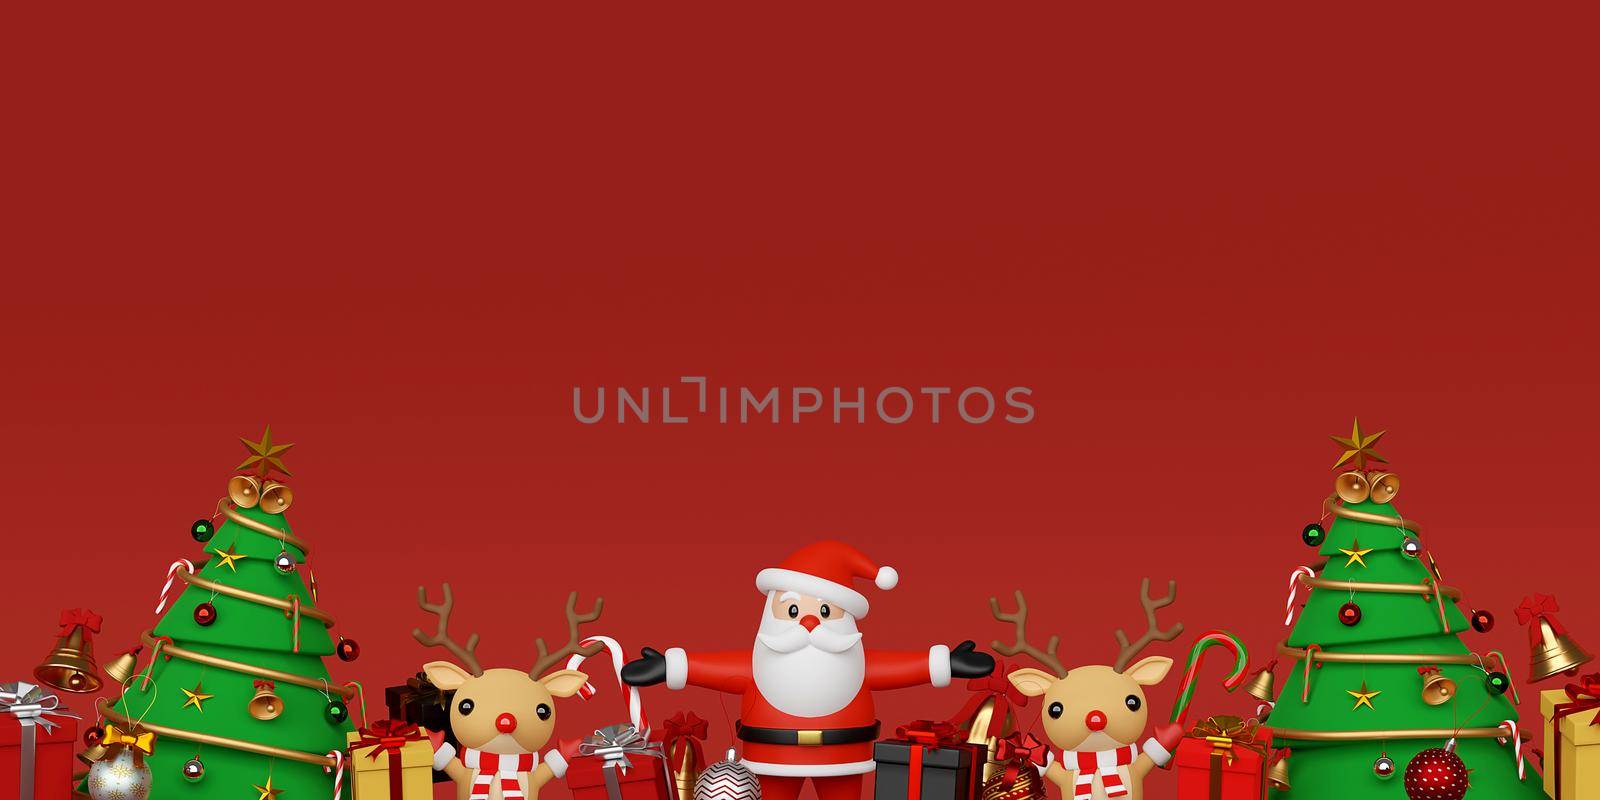 Merry Christmas and Happy New Year, Background of Santa Claus and reindeer with Christmas gifts, 3d rendering by nutzchotwarut